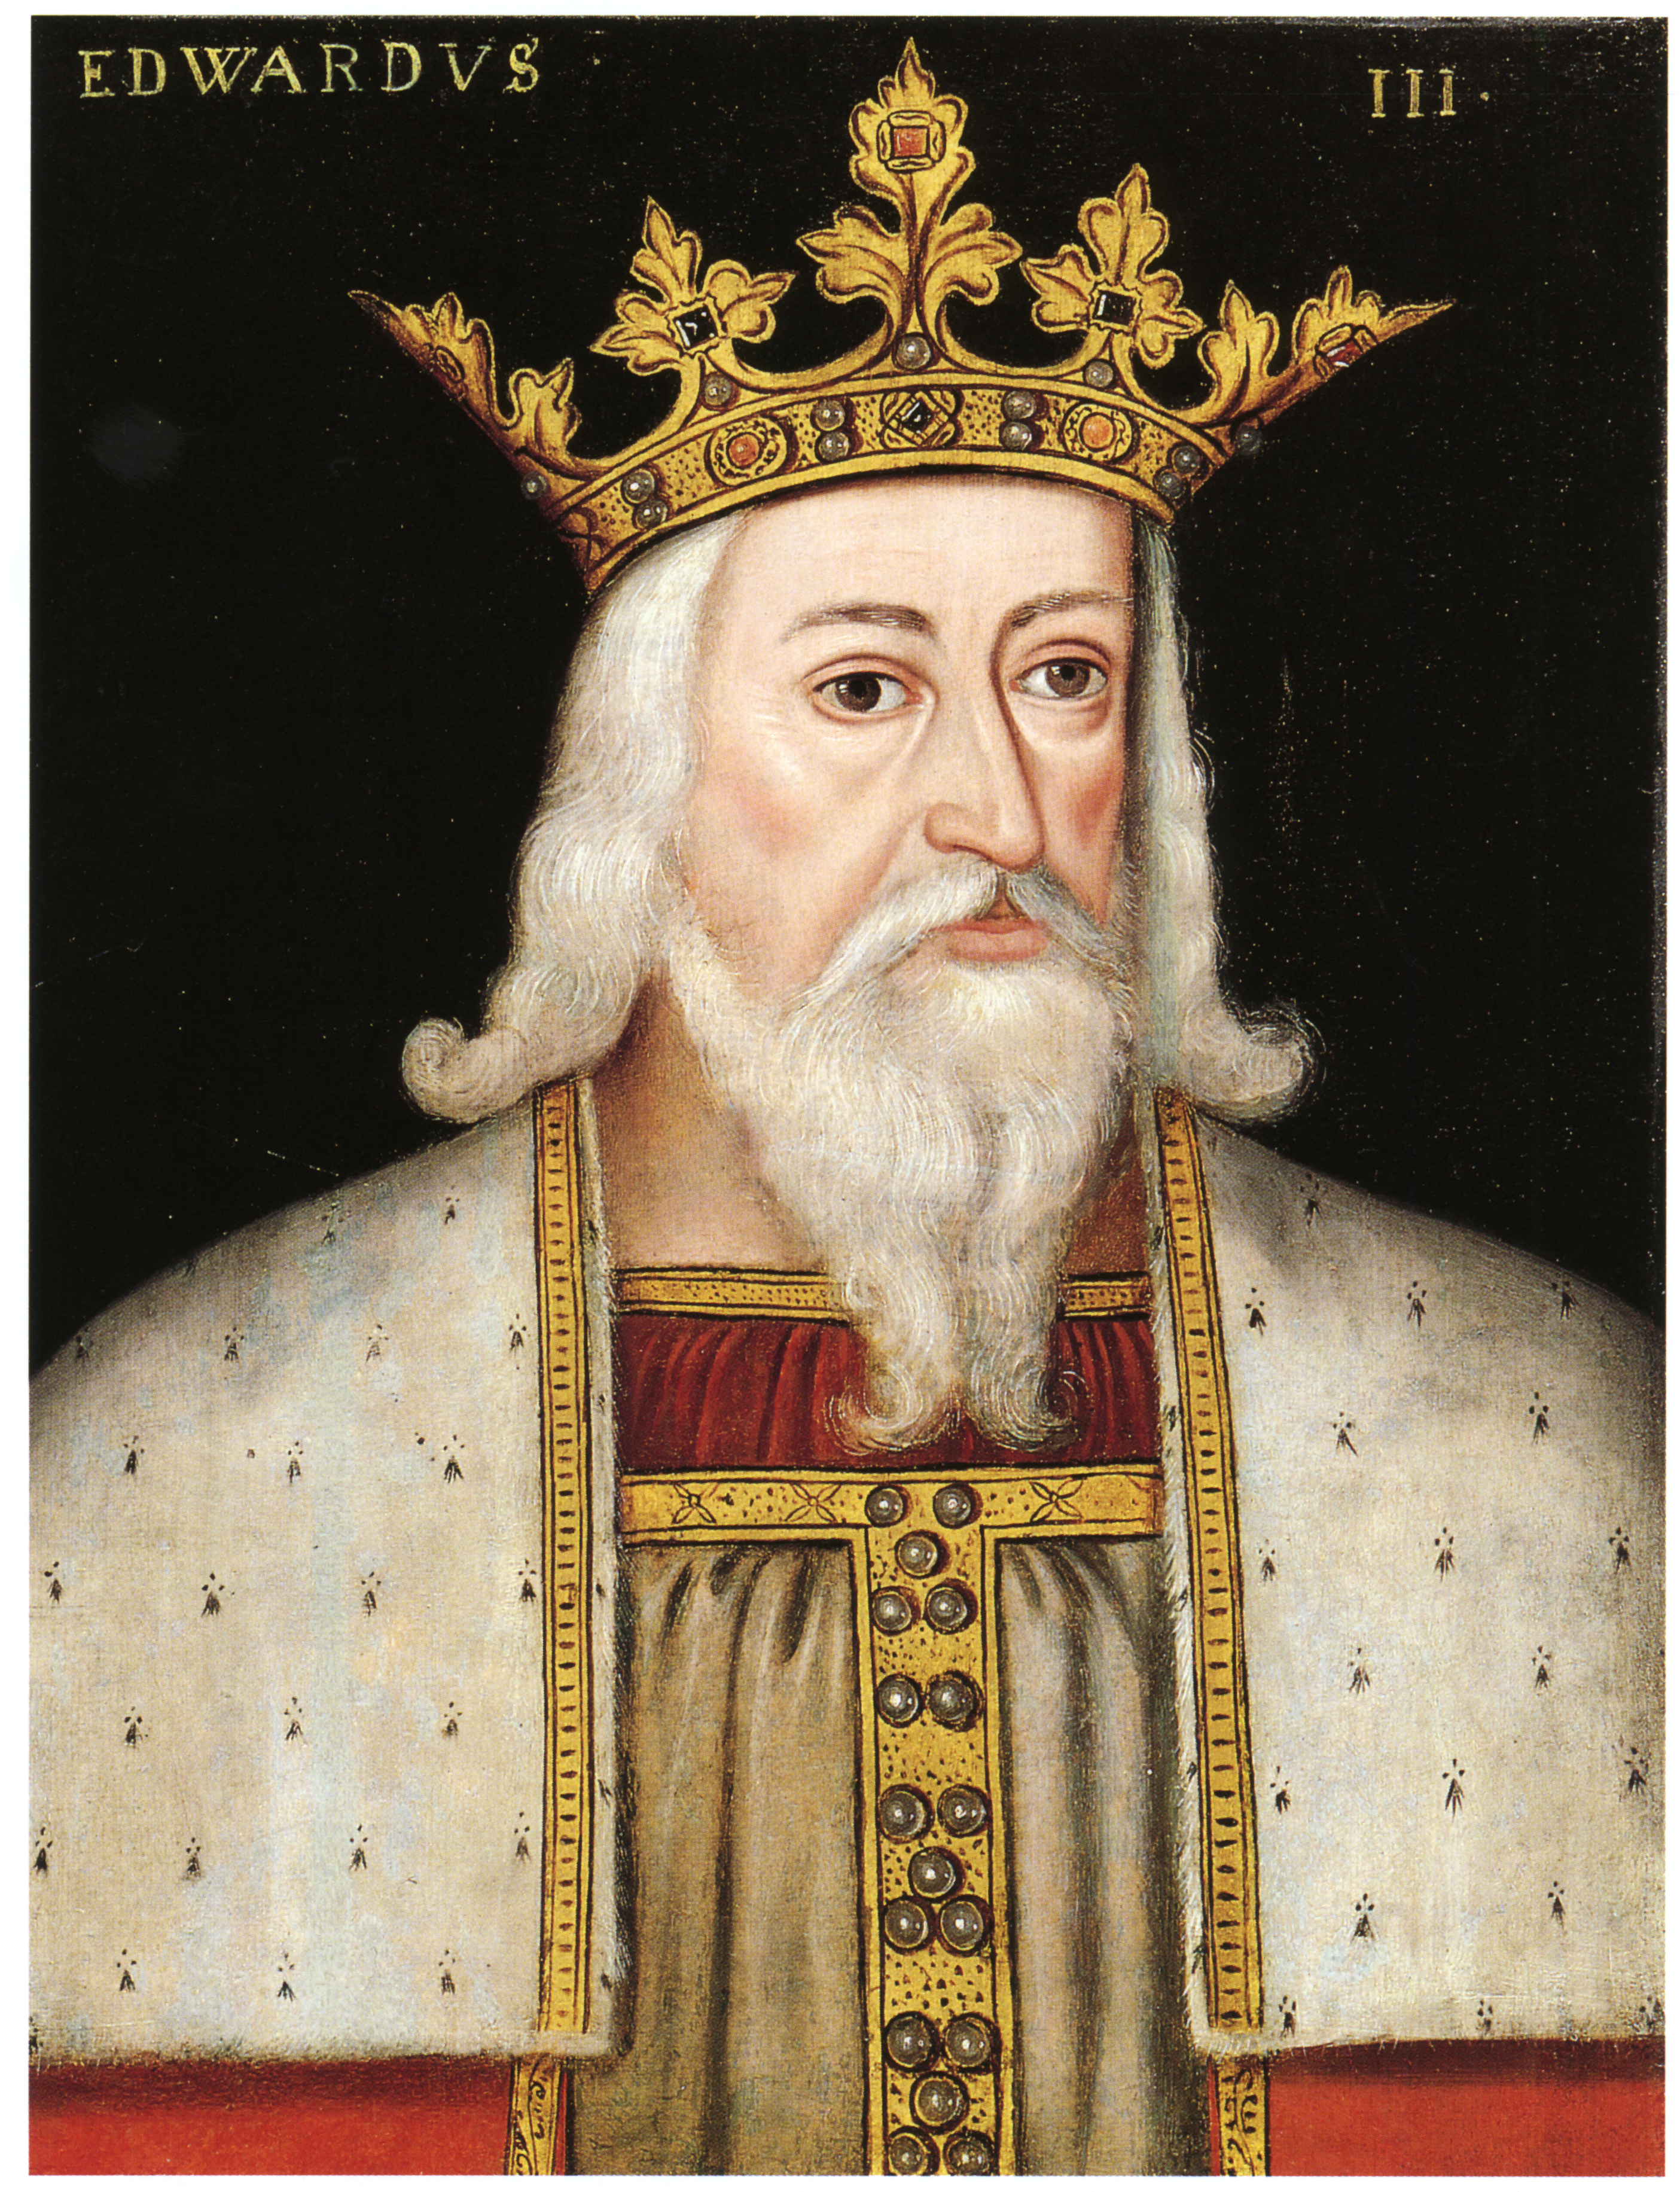 Painting of King Edward III of England wearing a large, elaborate gold crown.